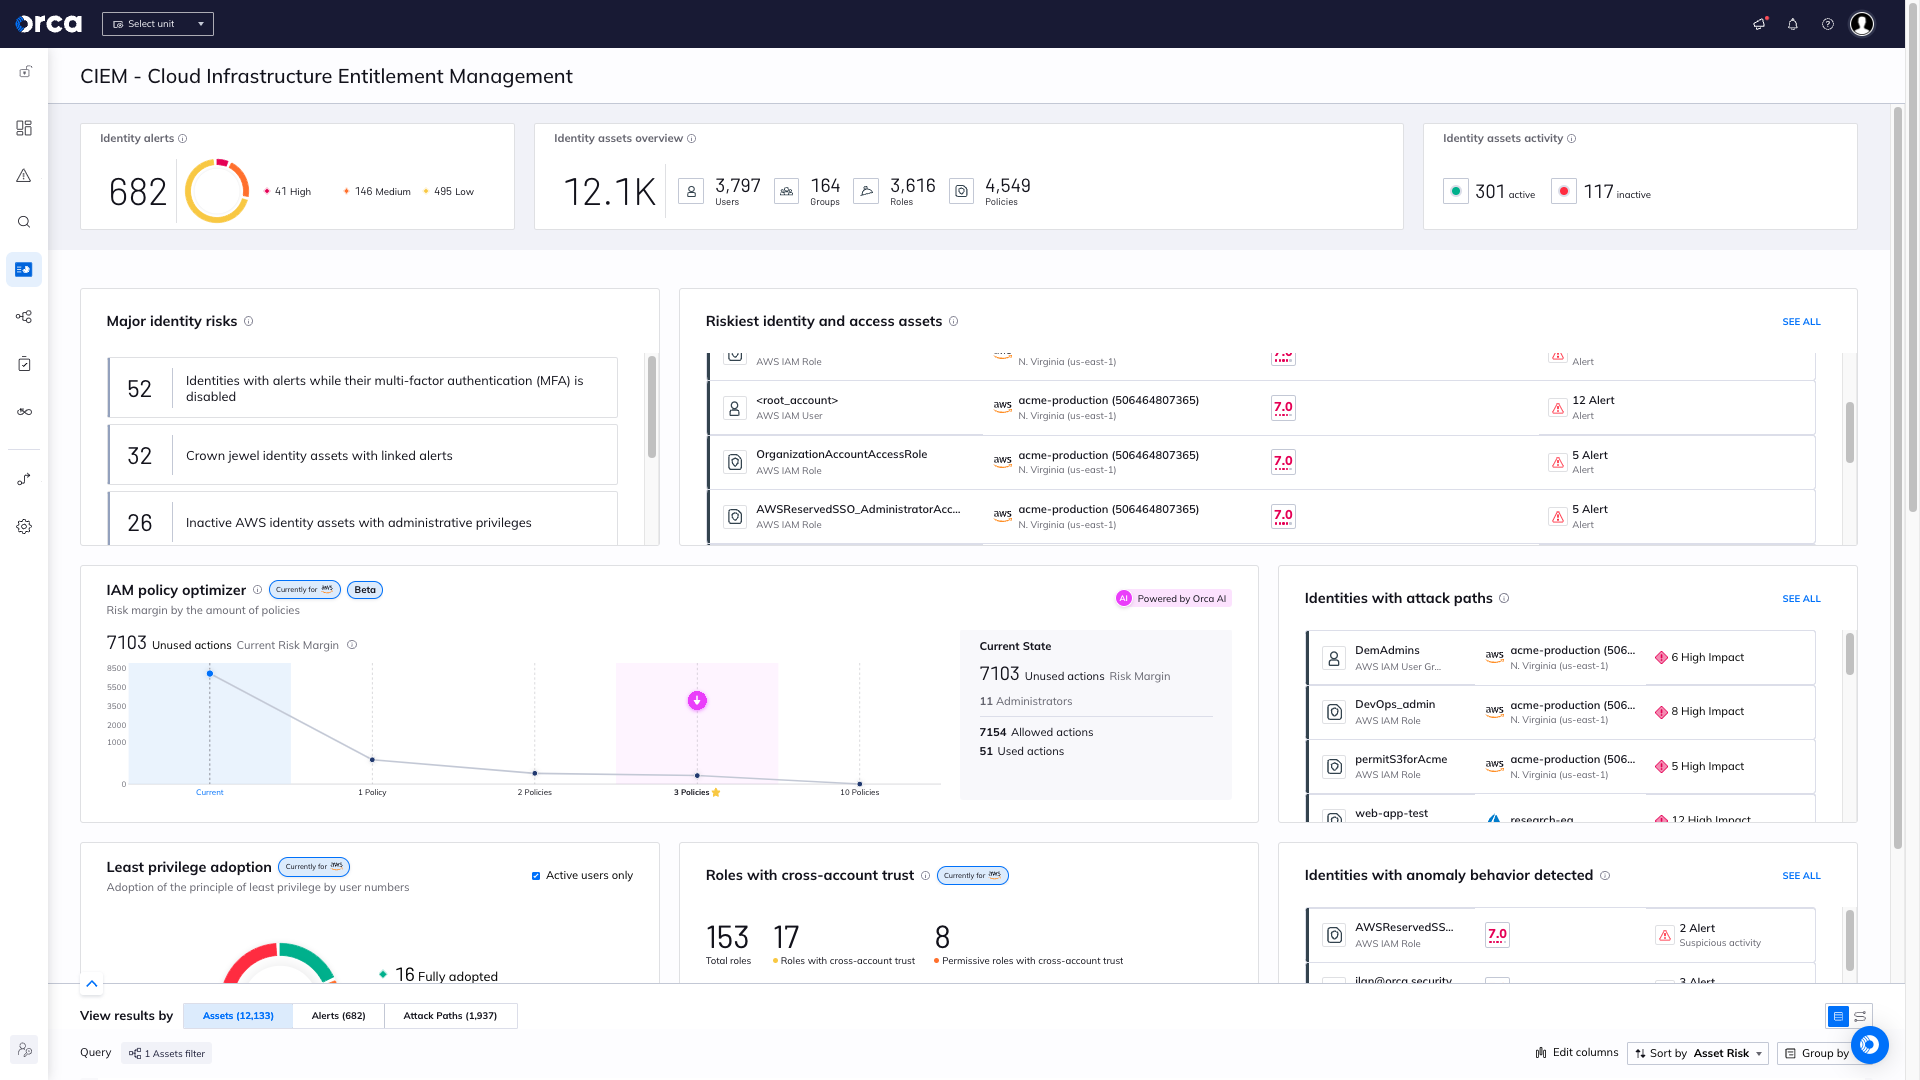 Orca’s newly-released CIEM Security View provides security teams with a fresh design, brings wider cloud coverage, and a smooth user experience for security and compliance teams.